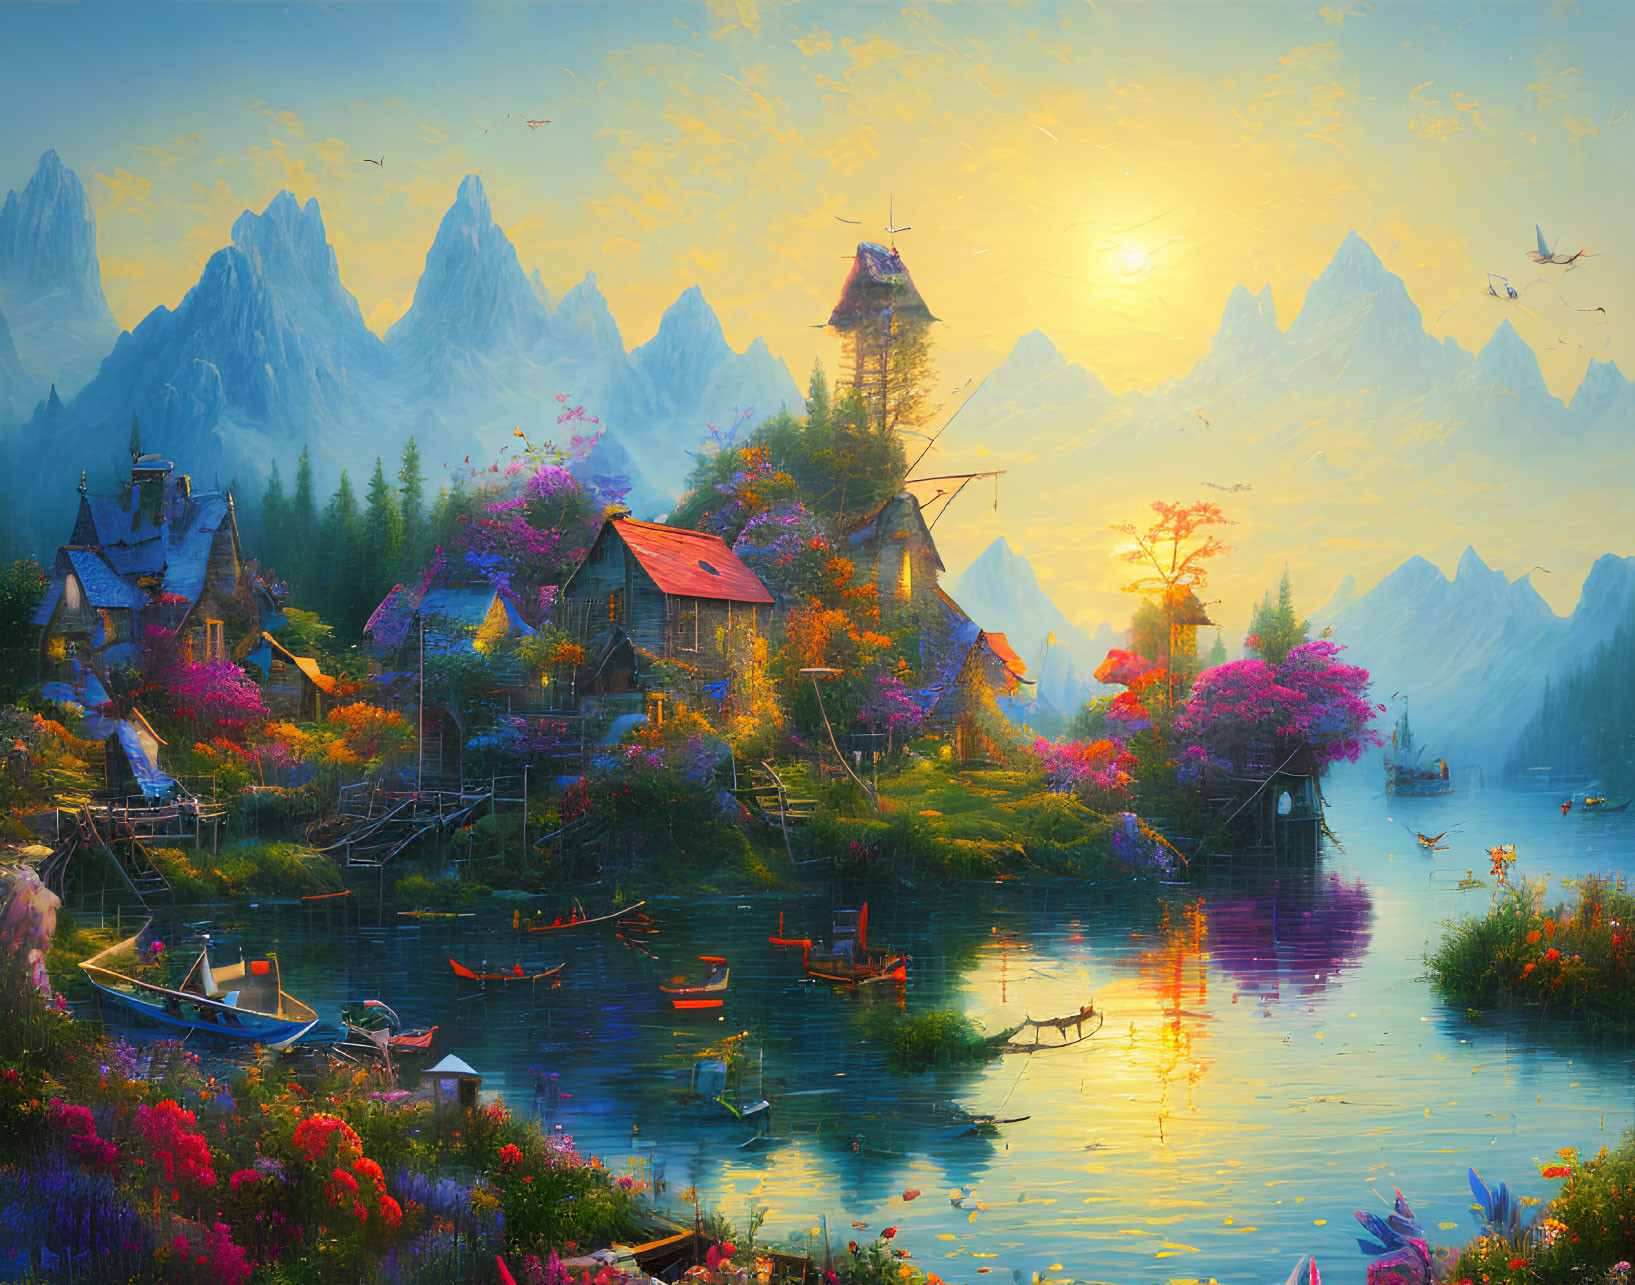 Scenic lakeside village at sunset with blooming trees and colorful boats